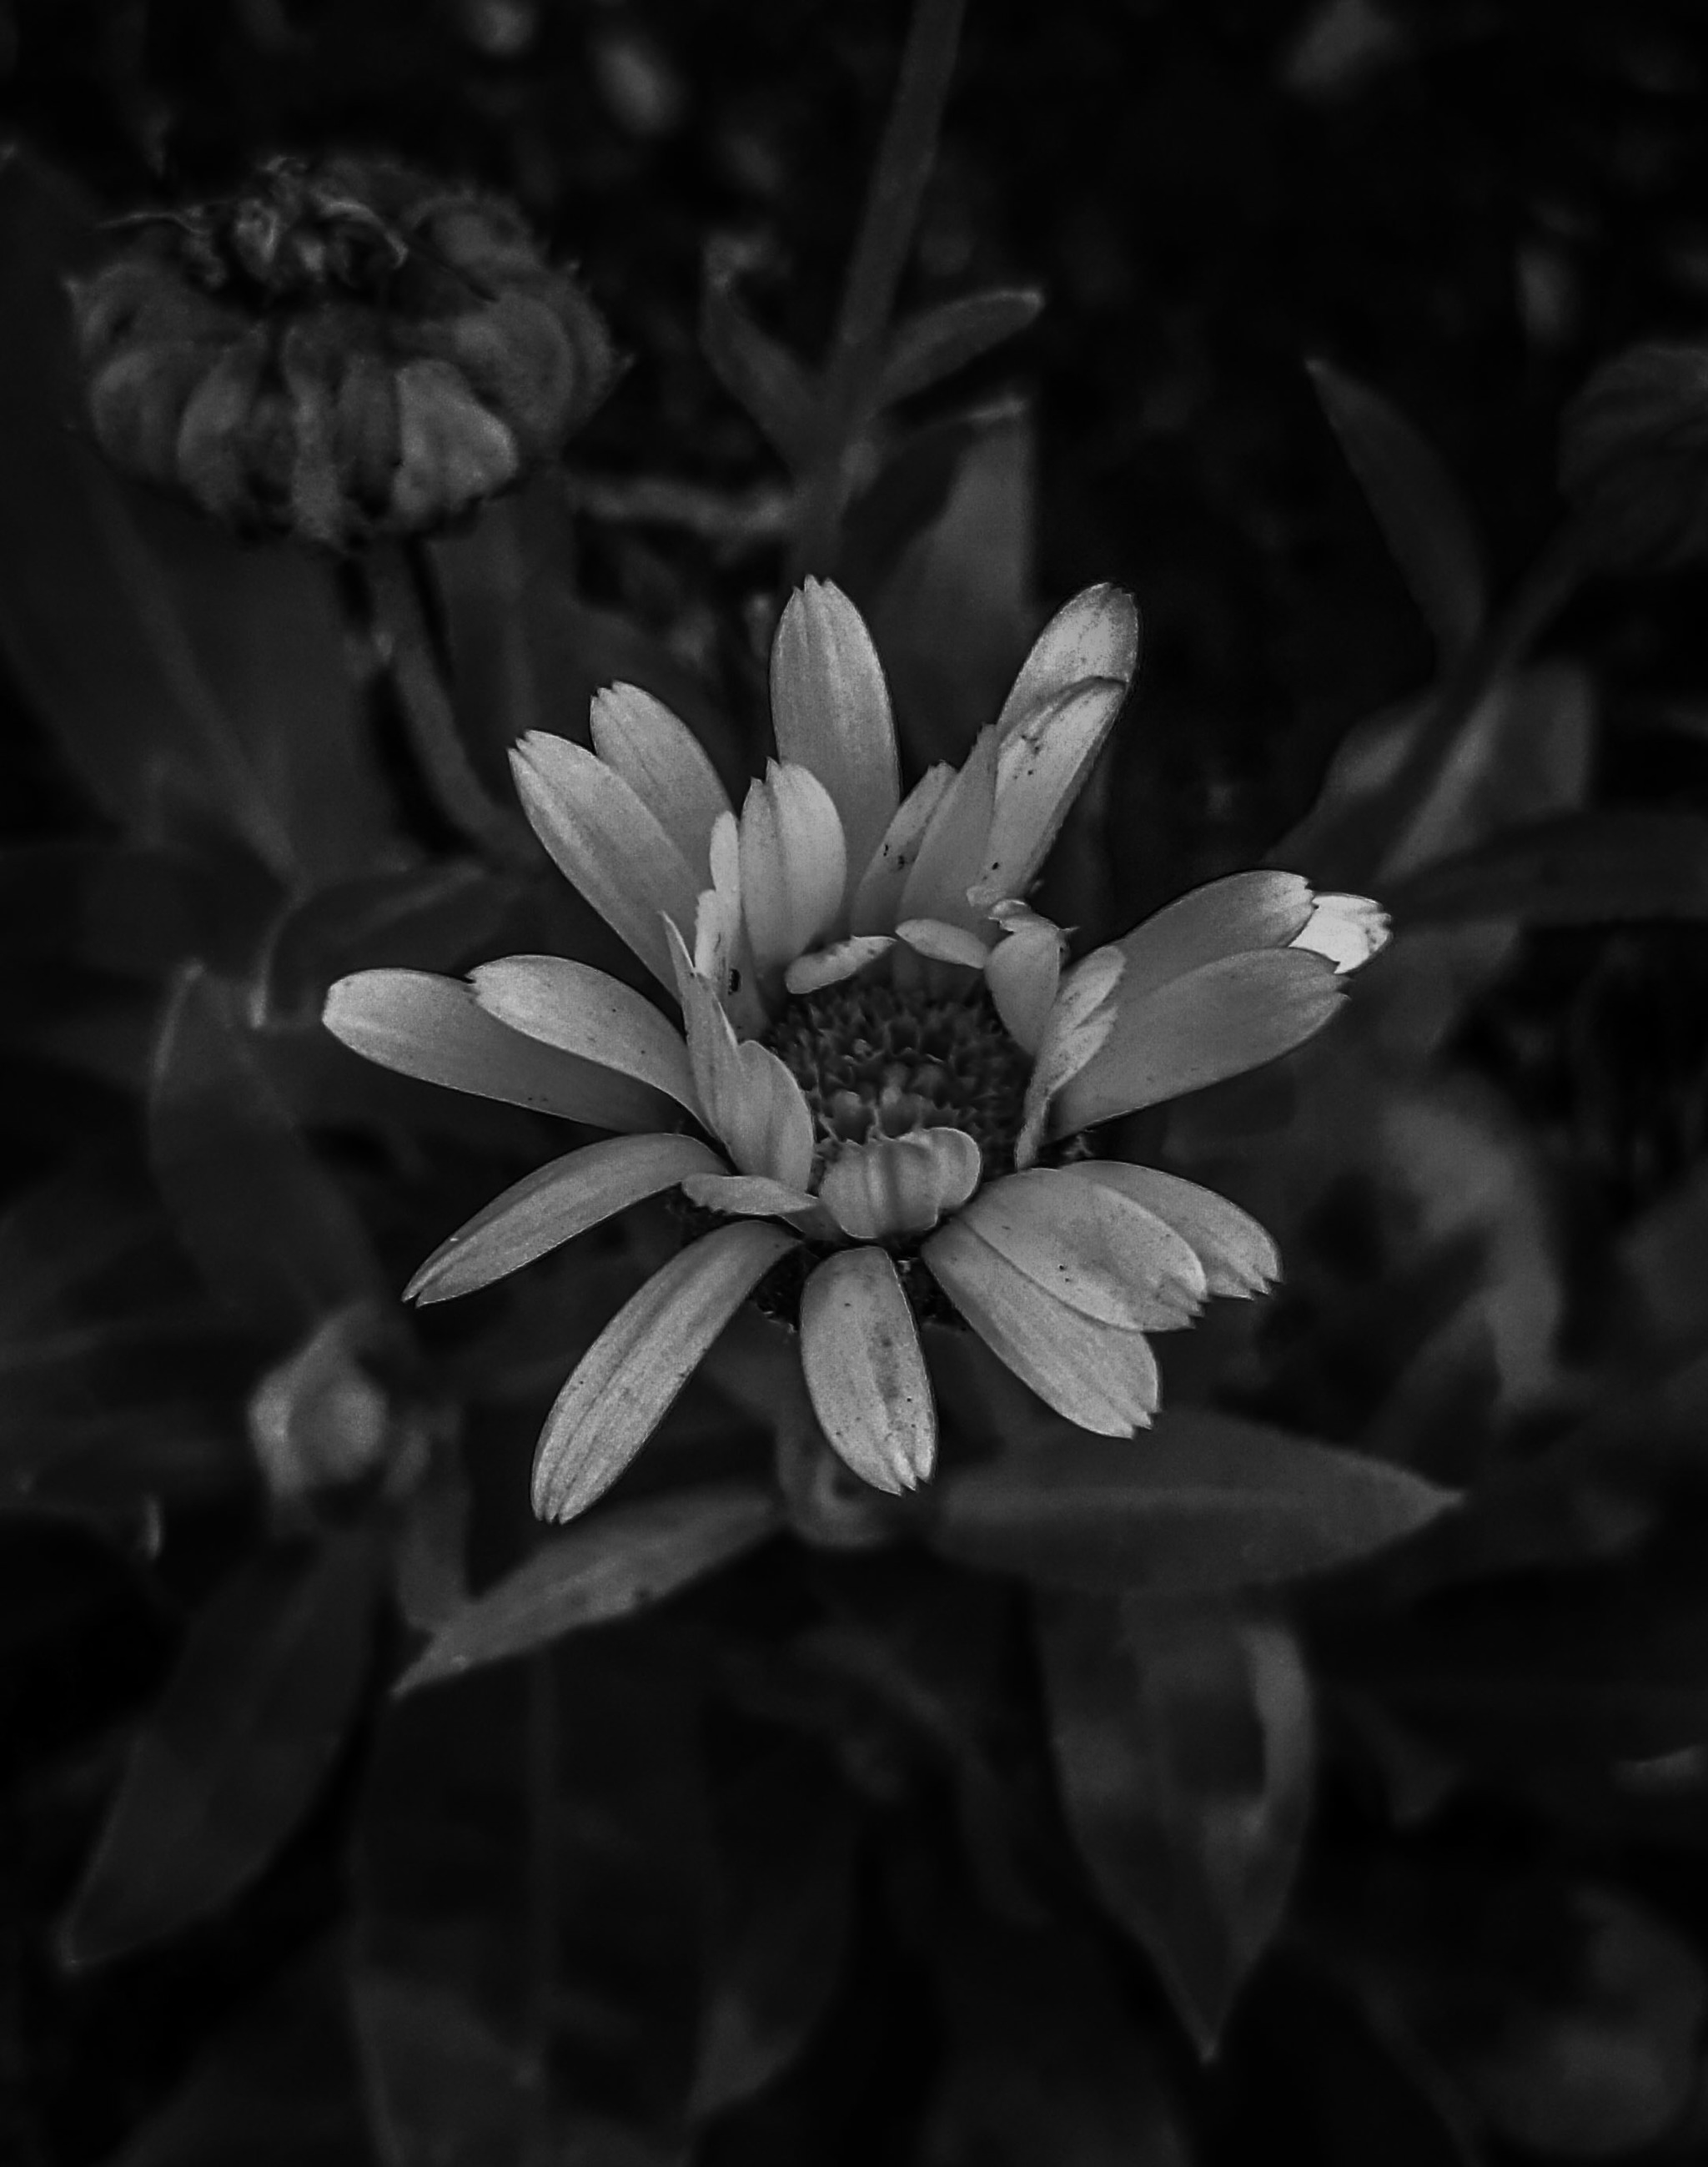 Black and white version - Longpost, Flowers, Image editing, Black and white photo, Mobile photography, My